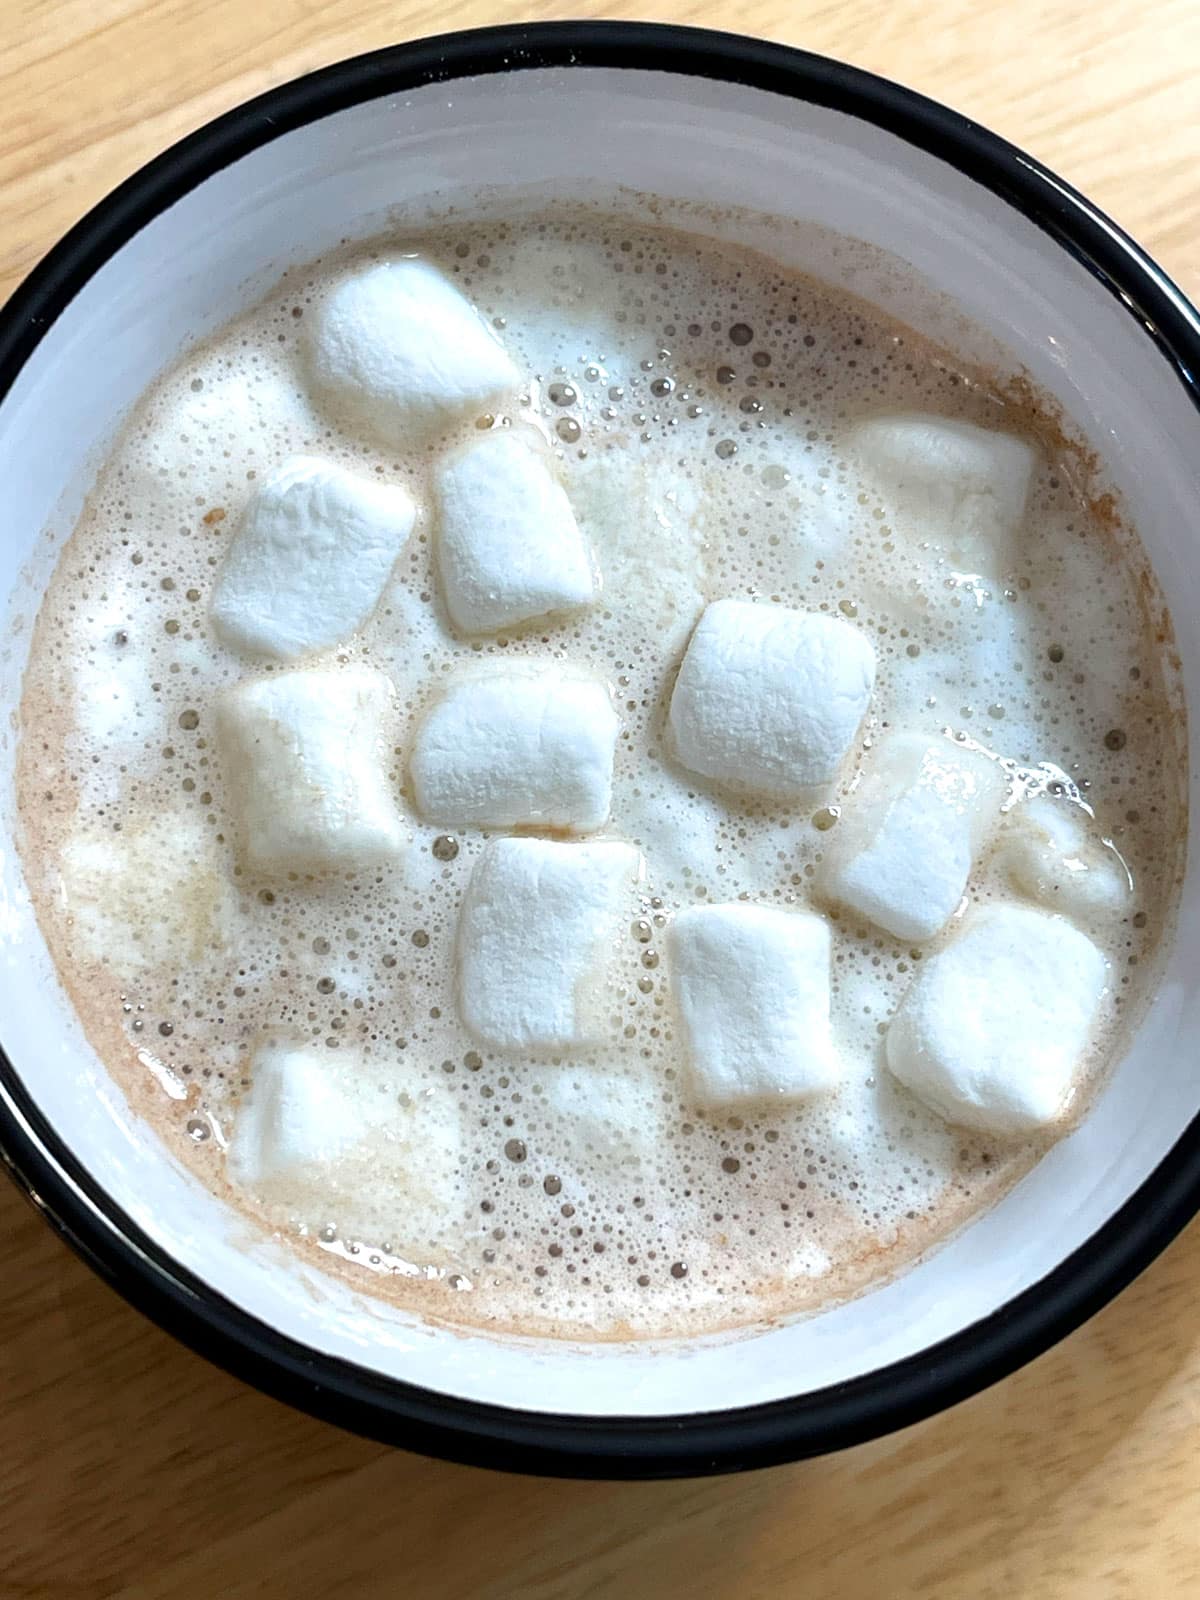 hot chocolate with cocoa powder